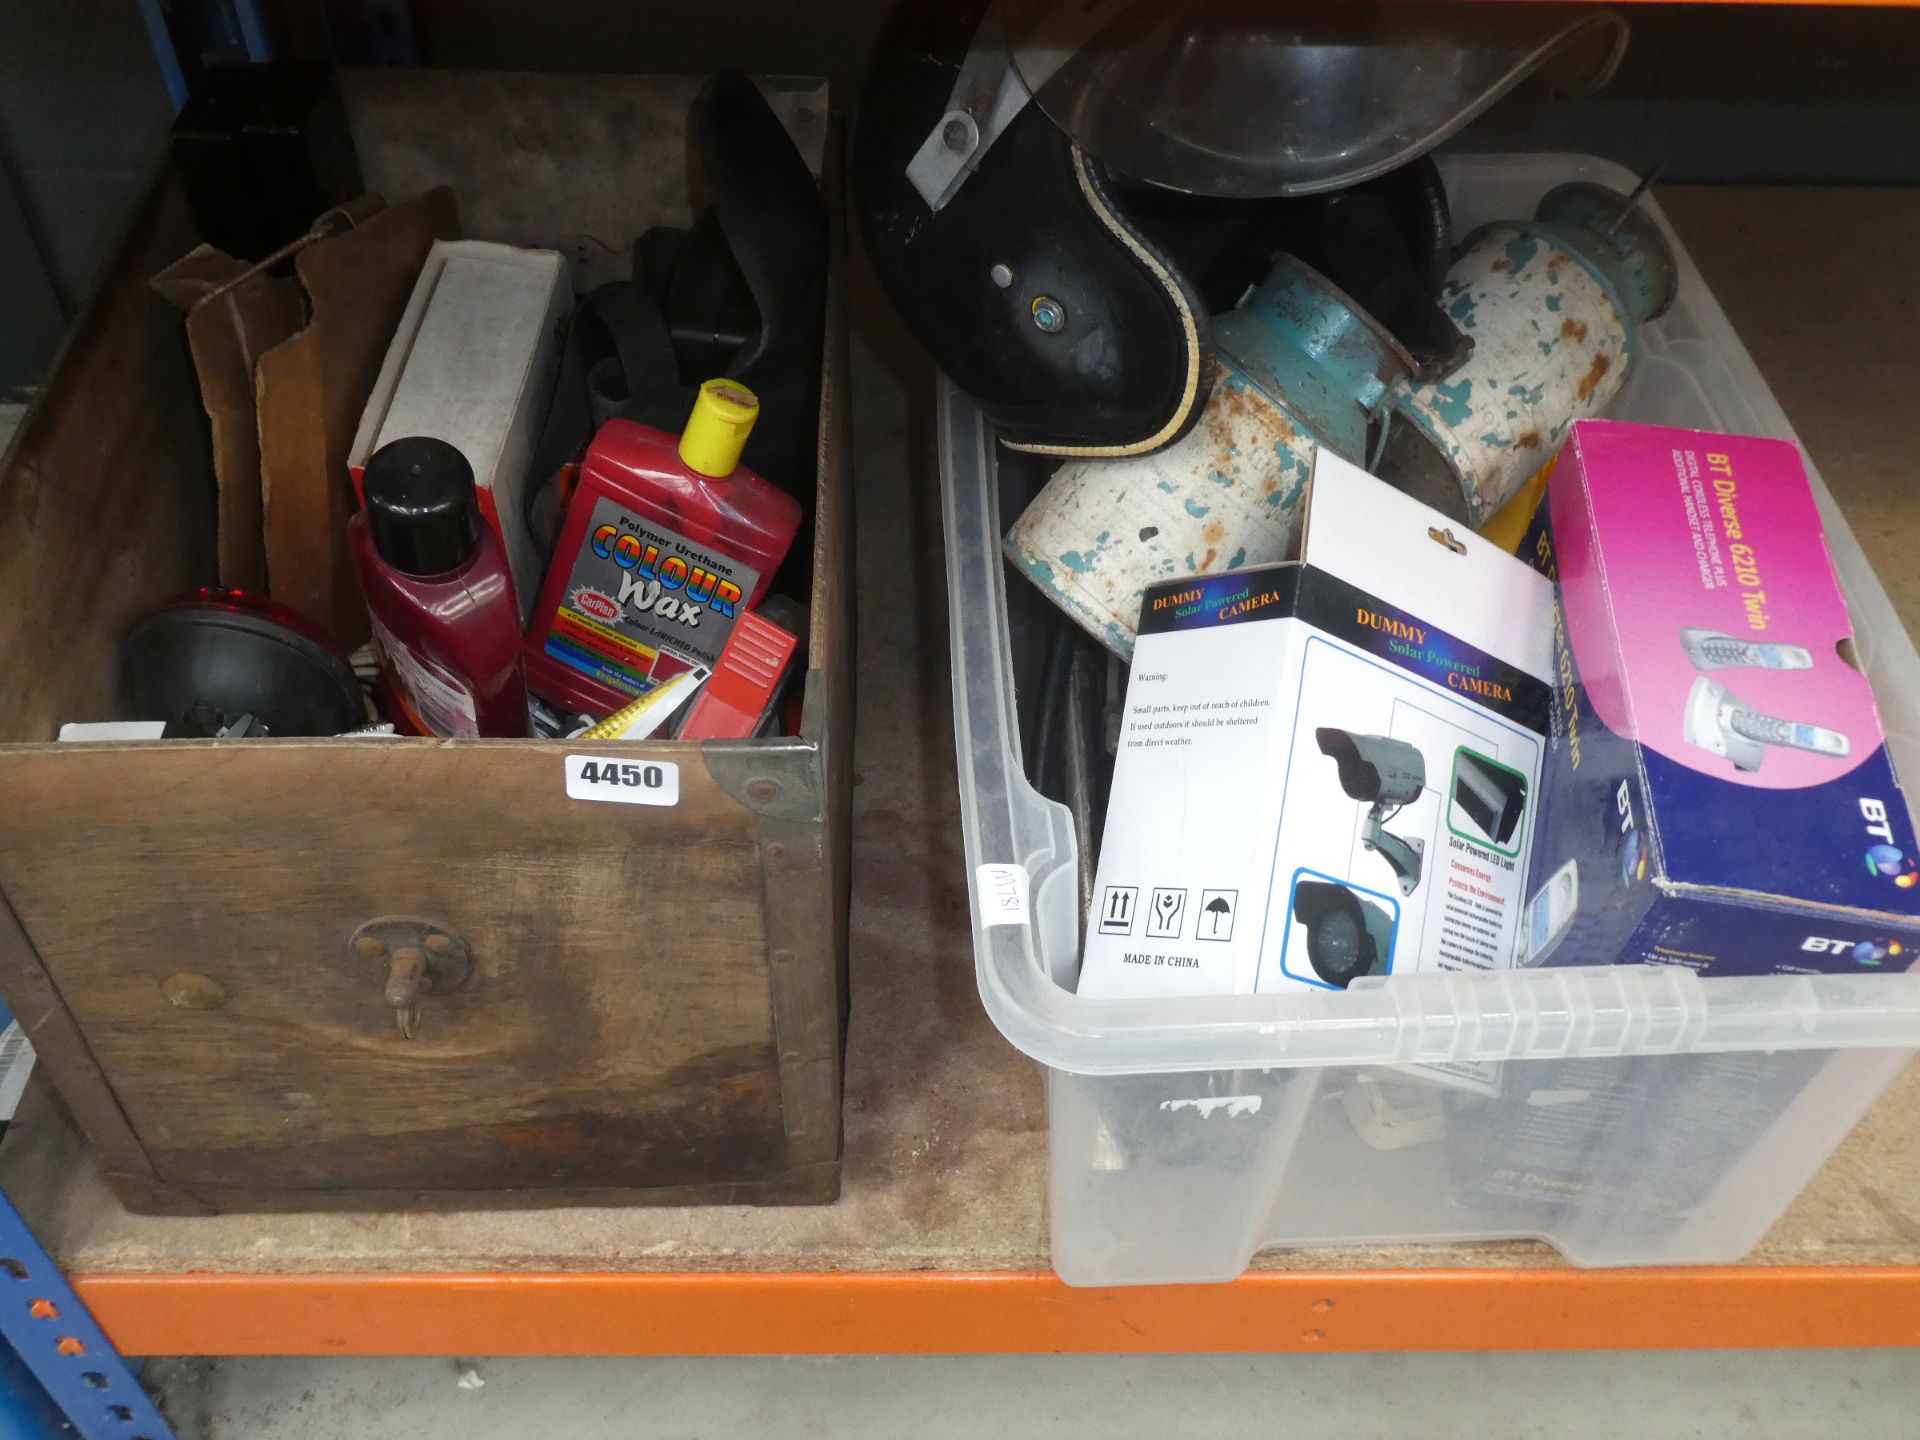 Underbay containing 2 boxes of car polish, lights, vintage motorcycle helmet, phones, dummy security